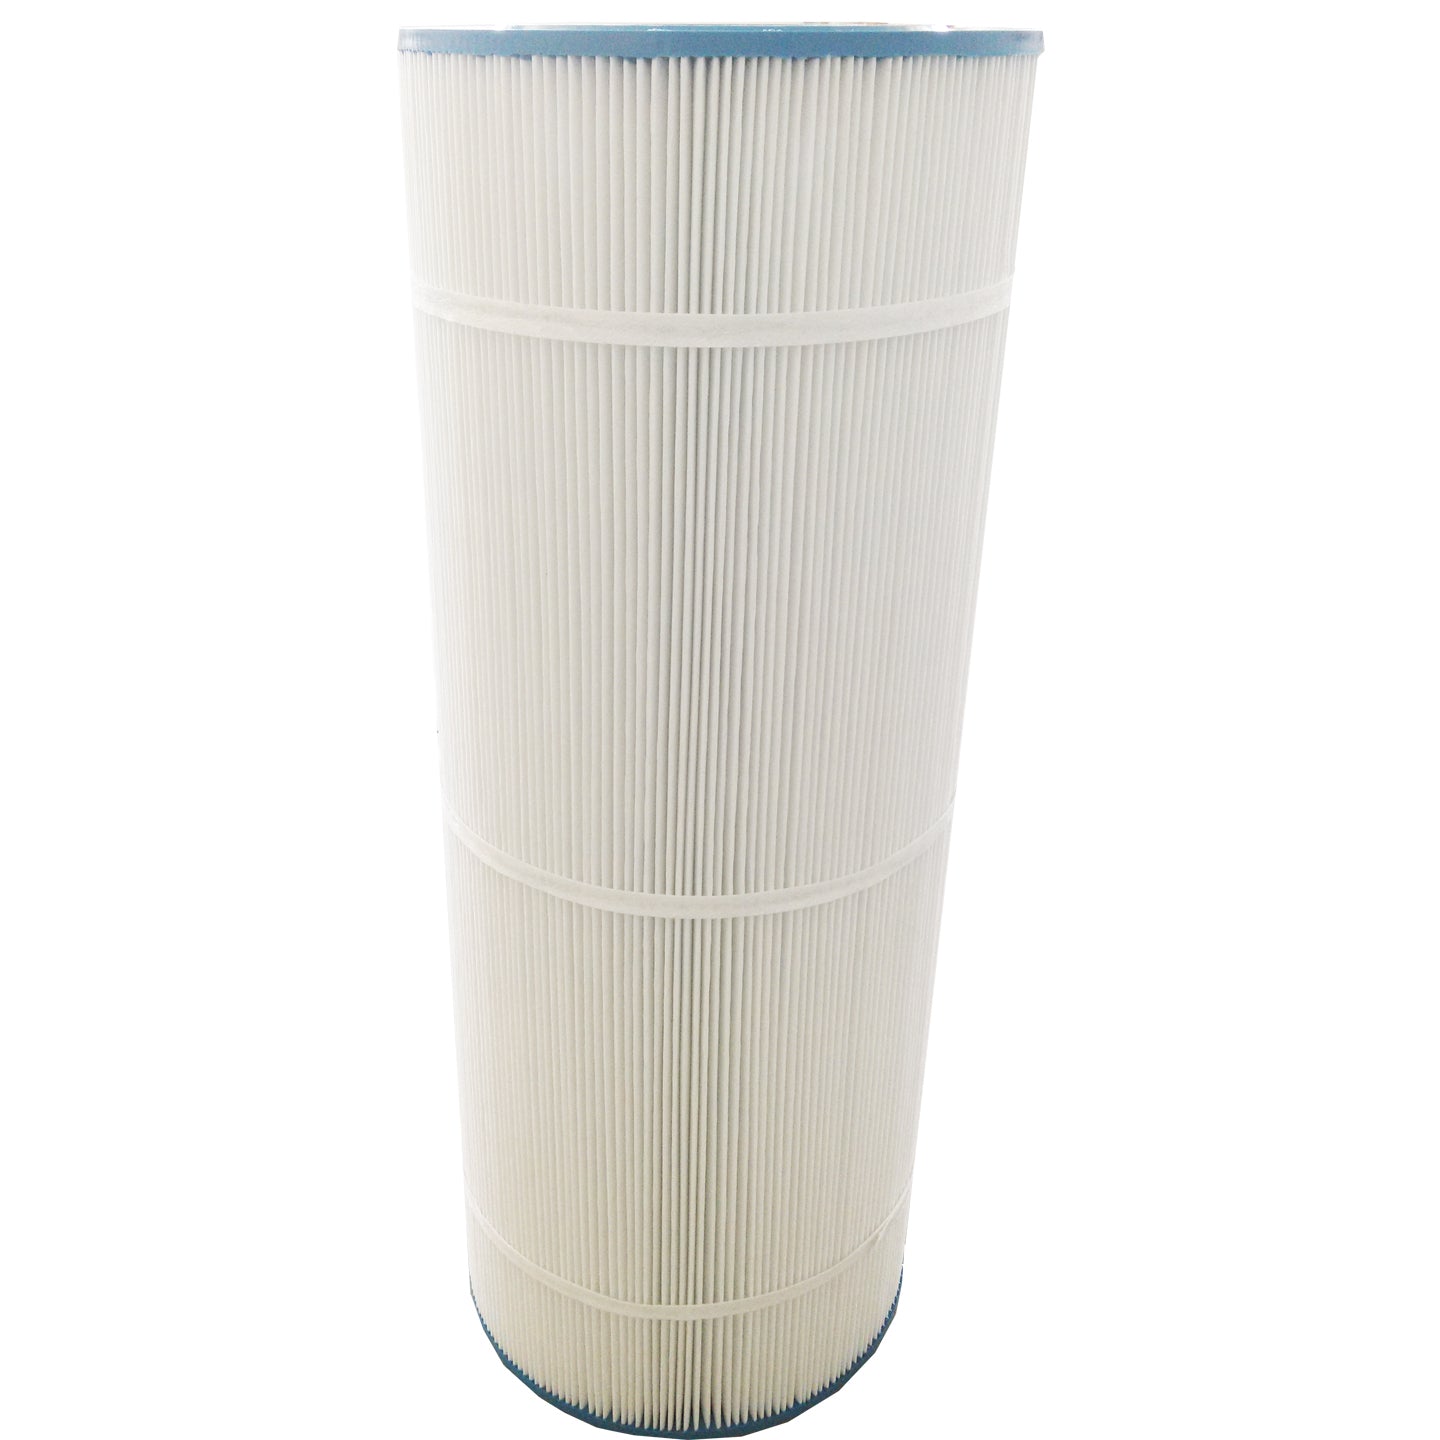 CX-1200-RE Pool and Spa Replacement Filter by Tier1